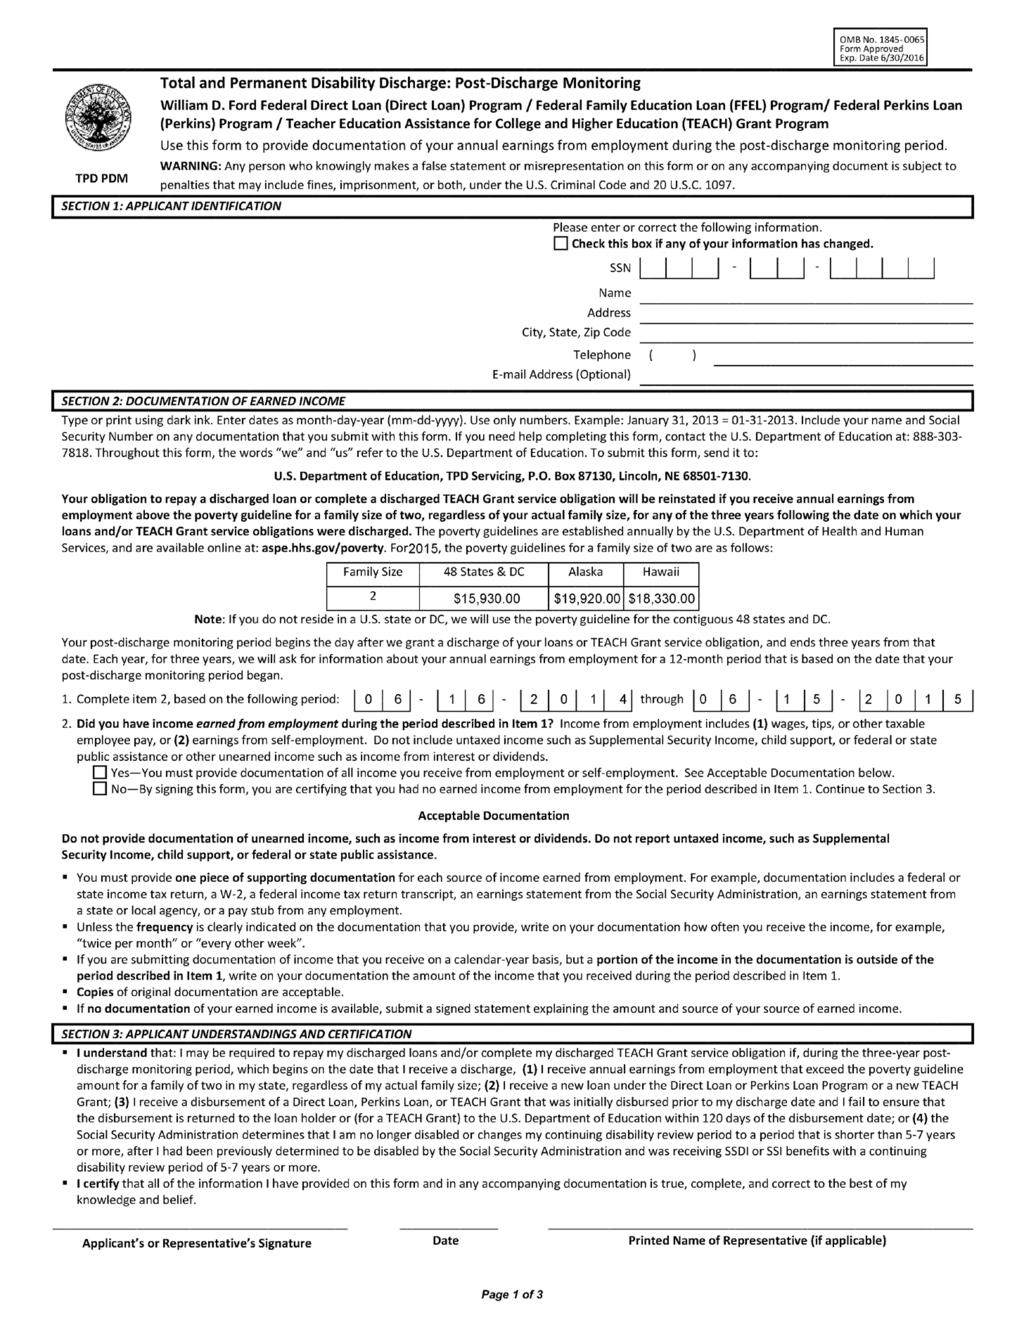 Appendix IV: Copy of Total and Appendix IV: Copy of Education s Total and Permanent Disability Servicer s Form for Annual Income Verification96F Permanent Disability Servicer s Form for Annual Income